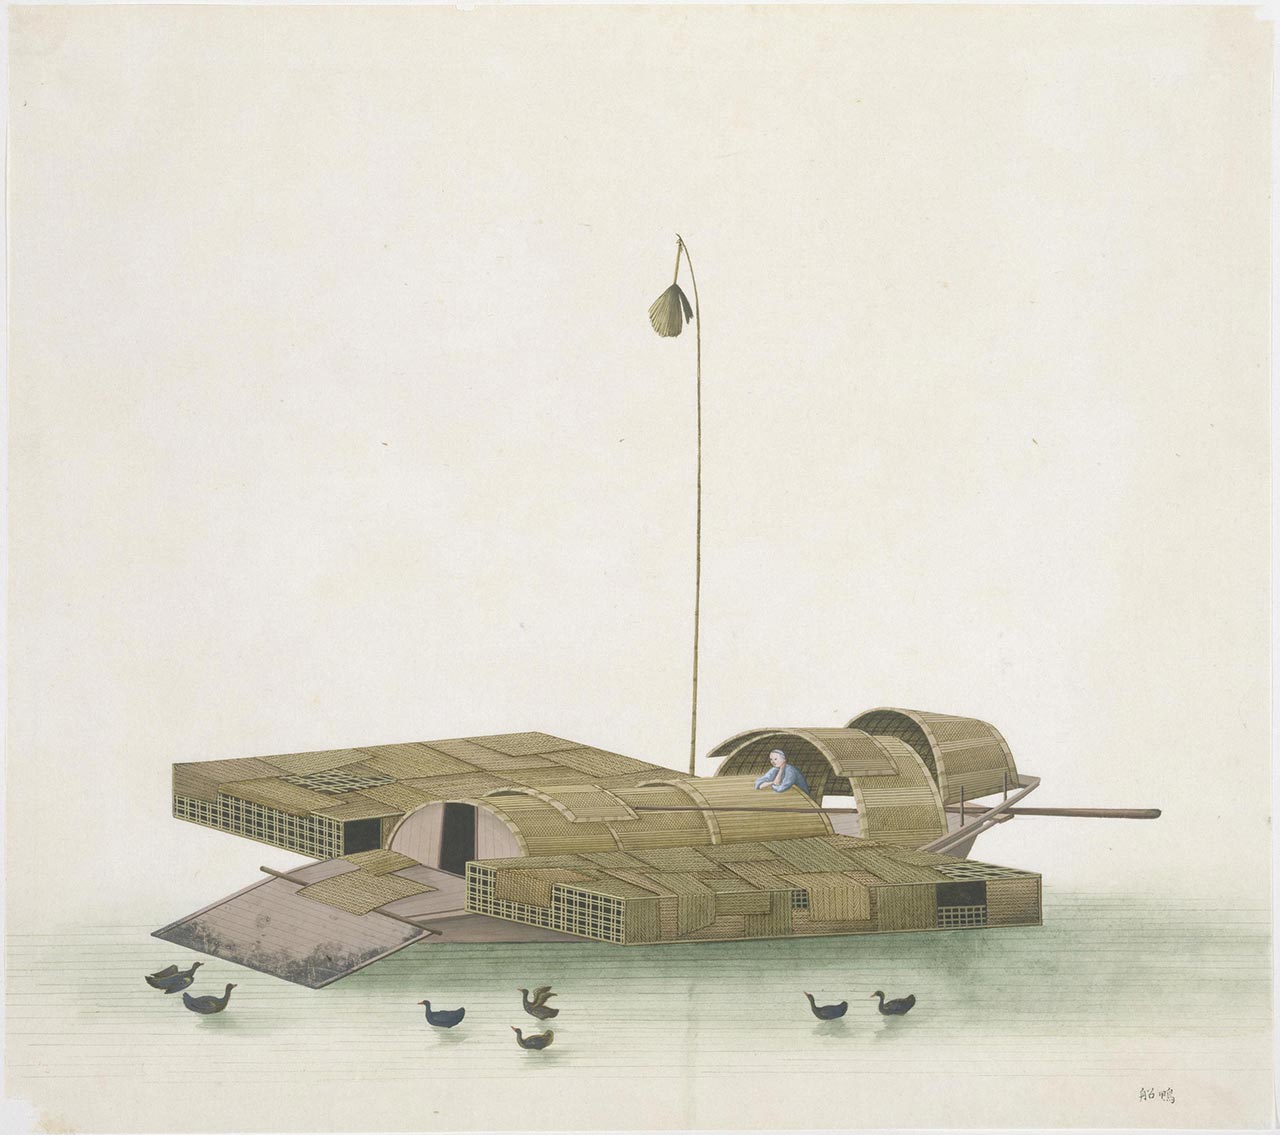 A duck boat. Duck-raising was a very common means of livelihood for the population of the Pearl River delta. The boat was specially designed to function both as the home and transport vessel for the ducks. 